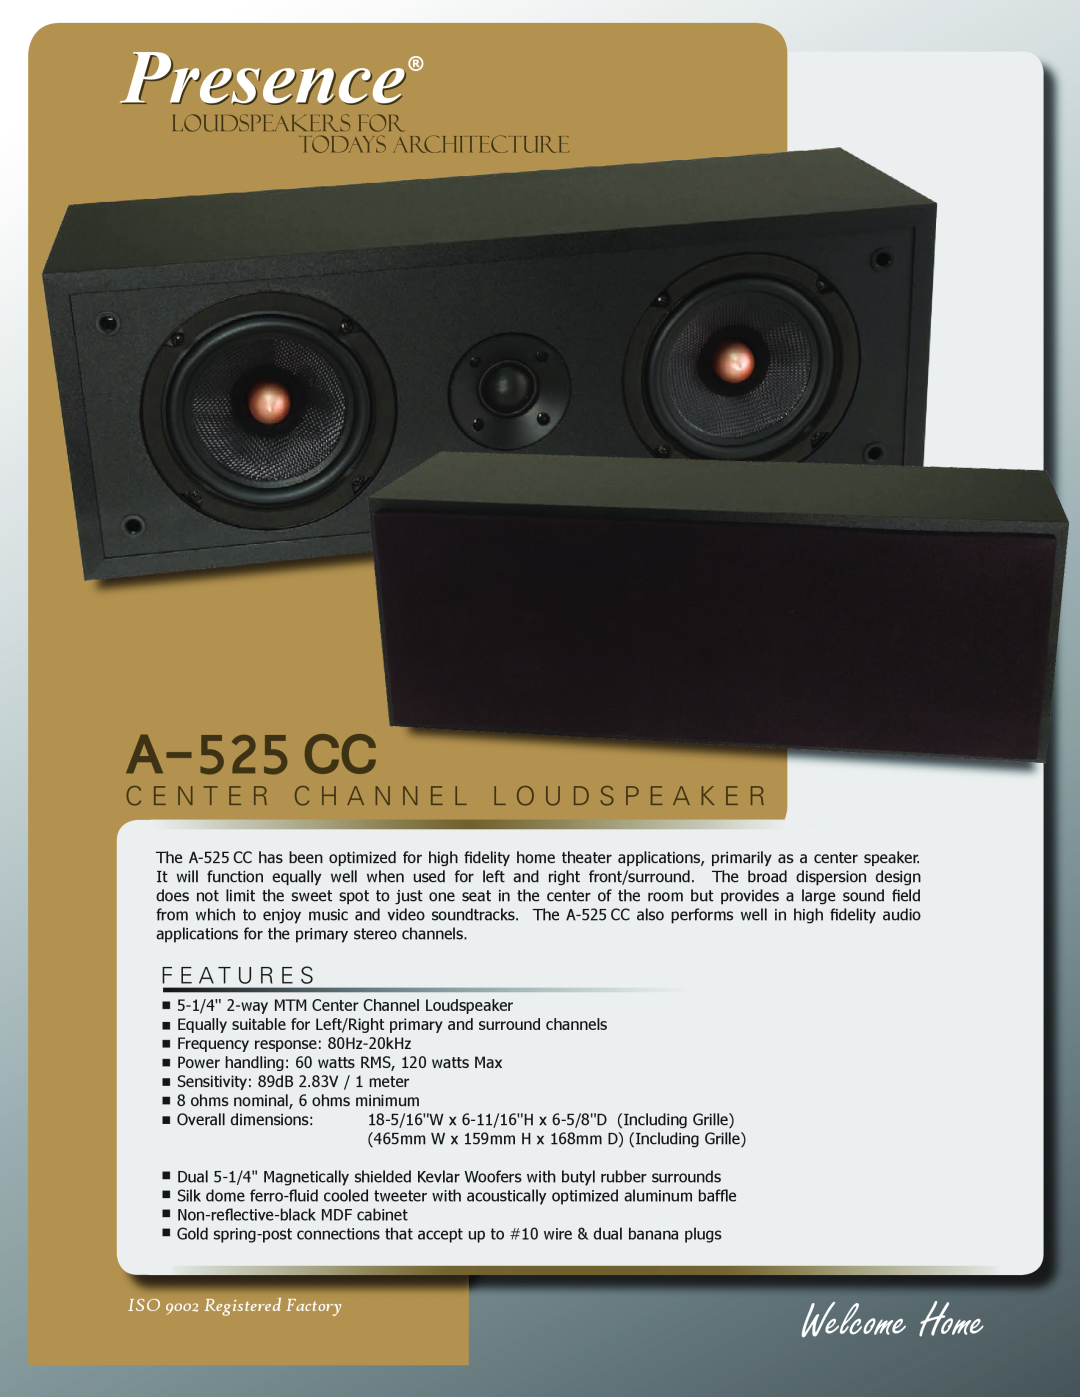 OEM Systems A-525 CC dimensions Presence, Welcome Home, Loudspeakers For Todays Architecture, F E A T U R E S, A-525CC 